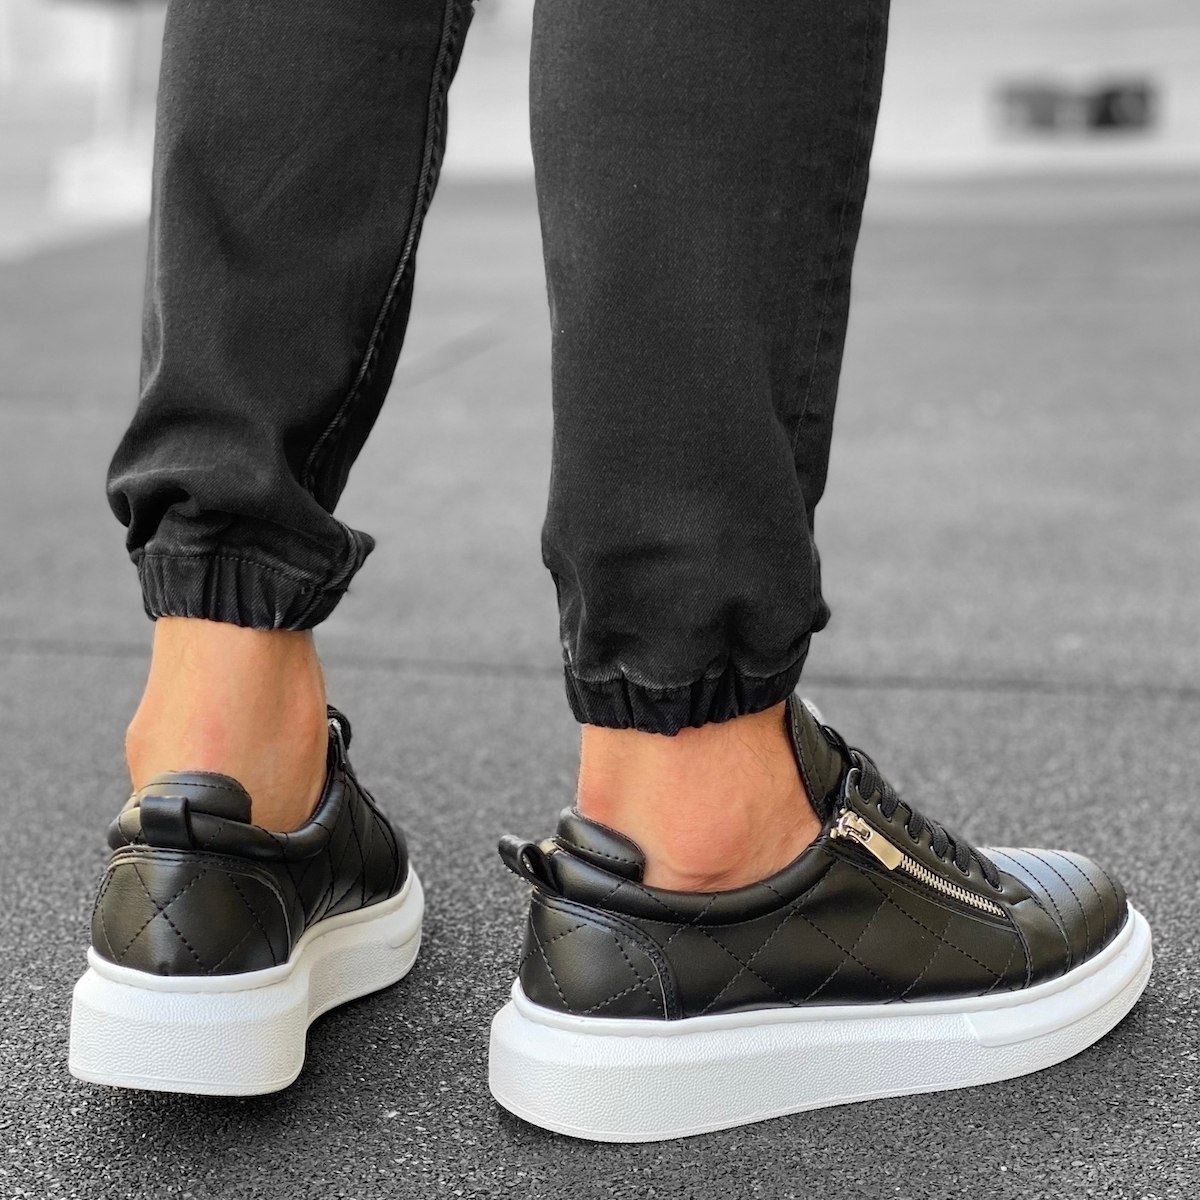 Casual Sneakers With Stitch and Side-zip Design in Black&White - 5